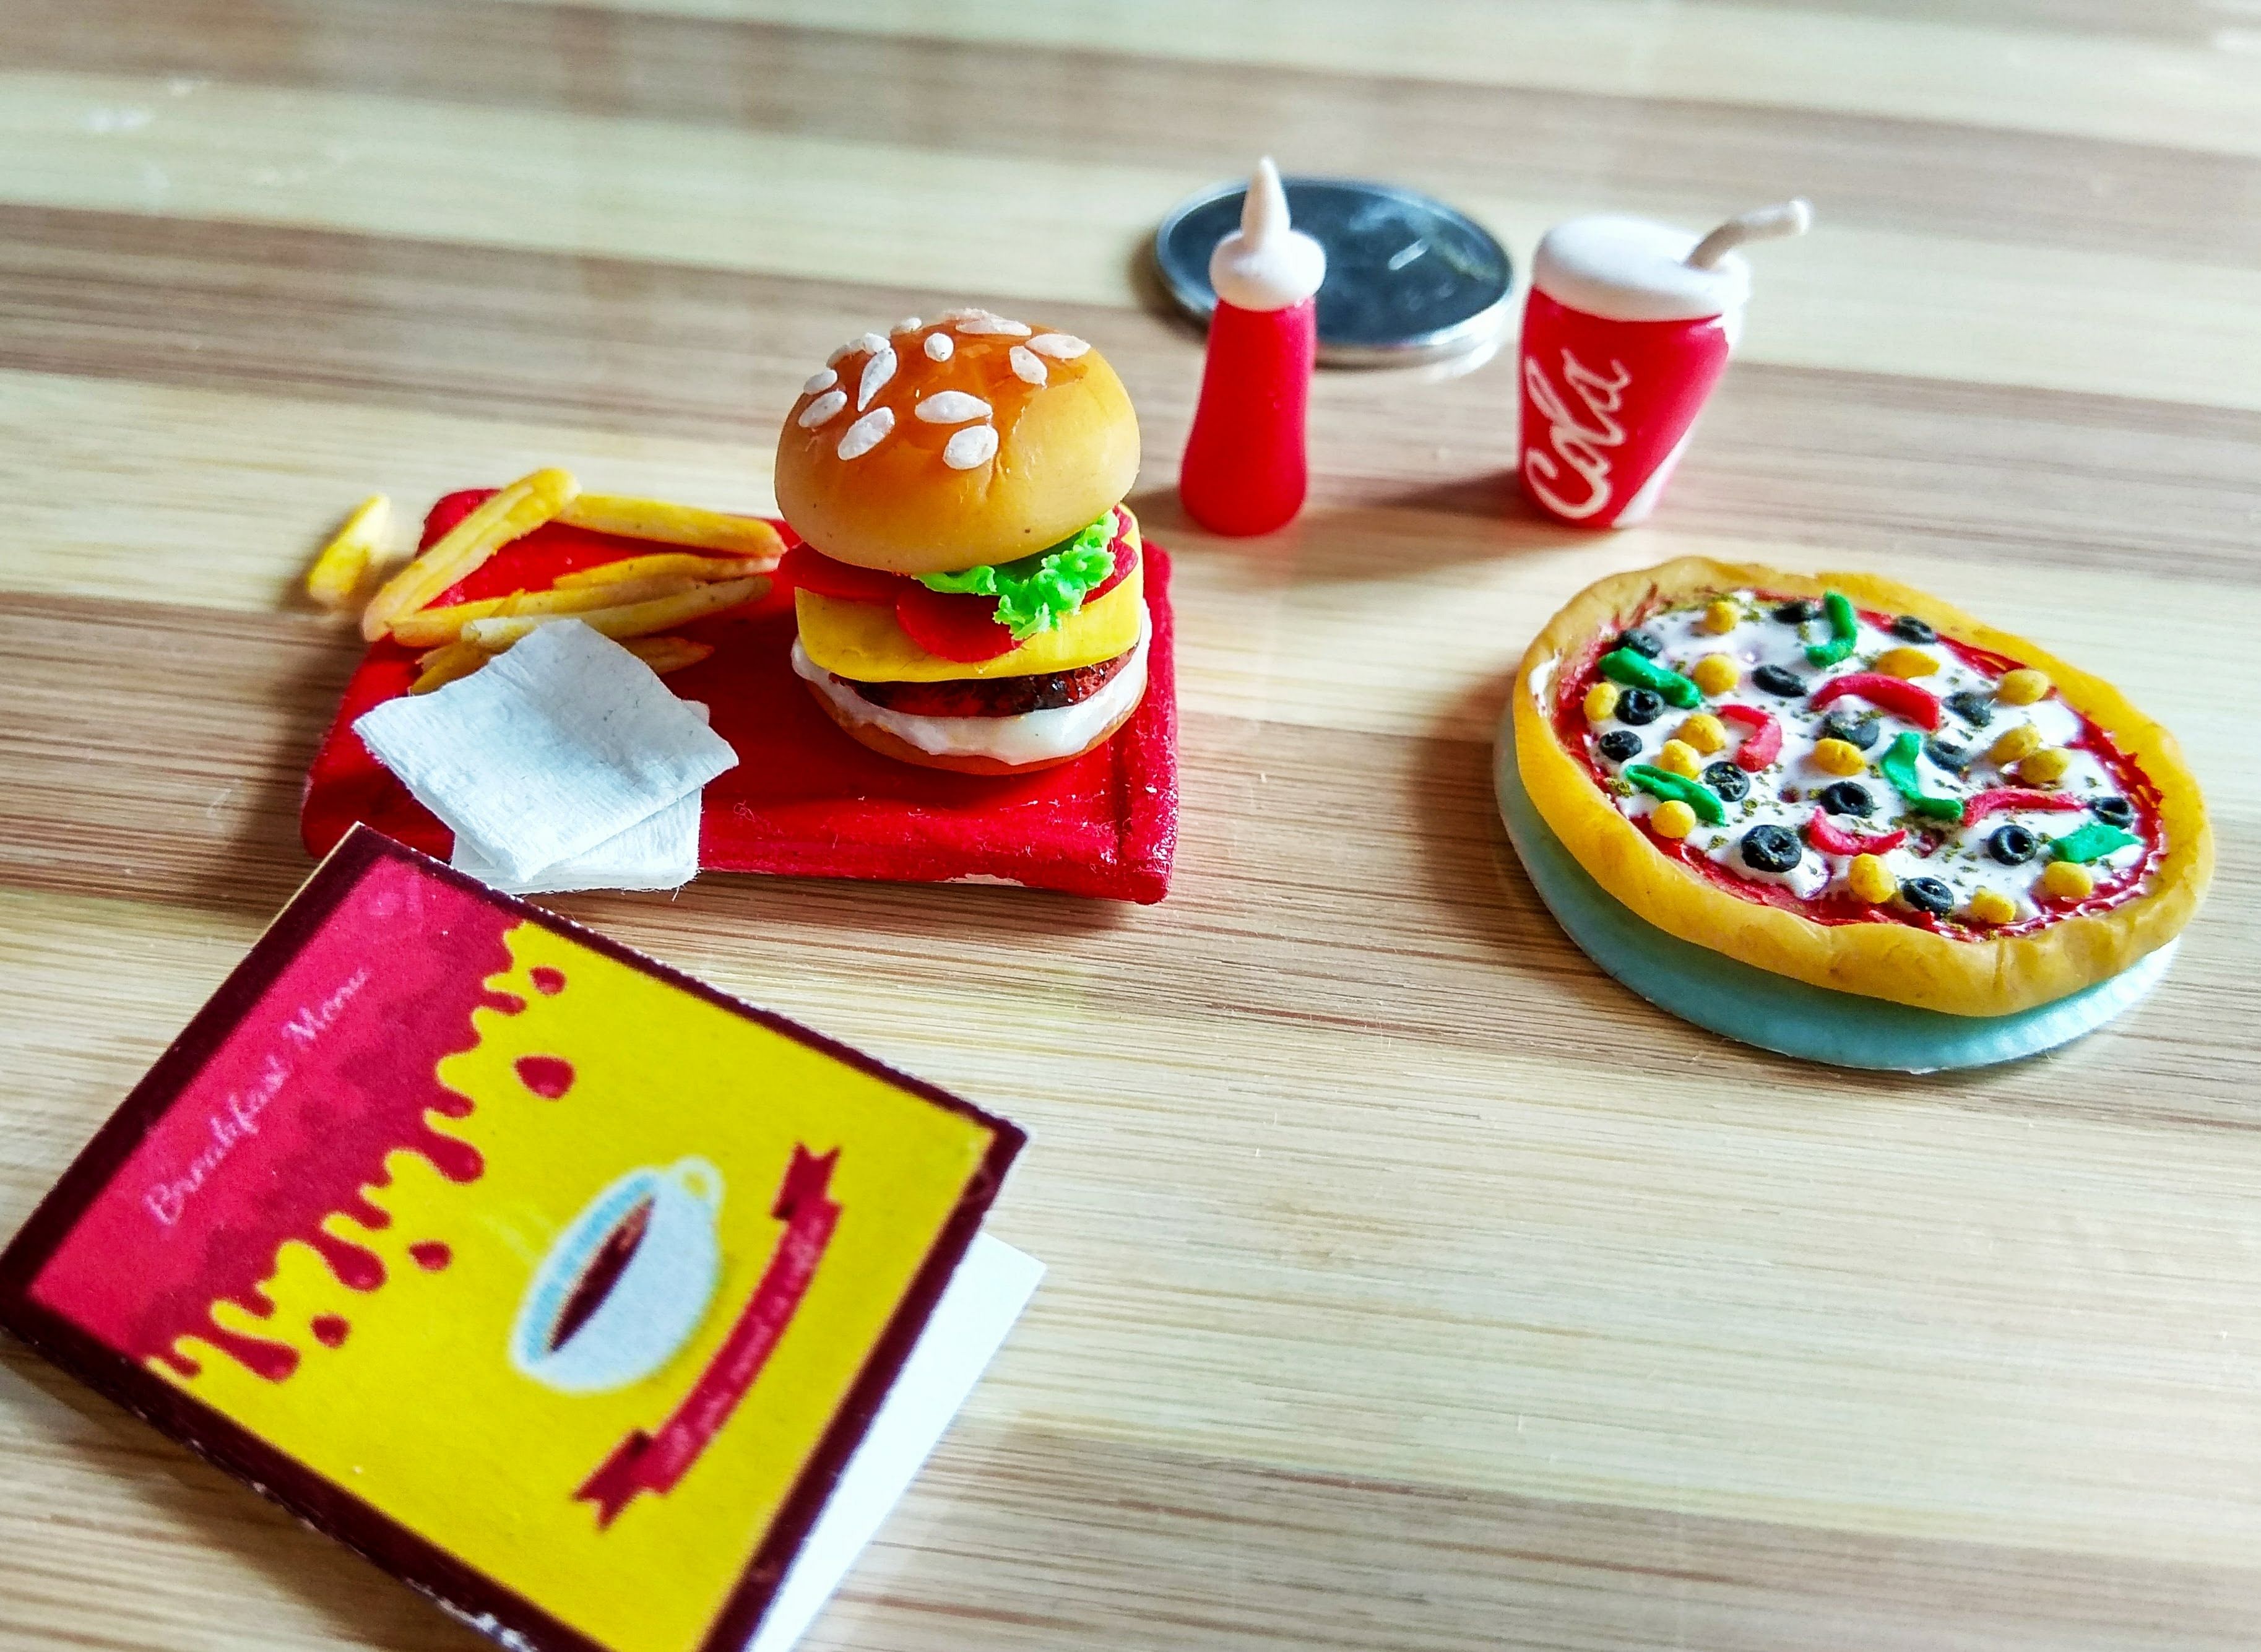 Umagayathri makes miniature food models of popular dishes out of air-dry clay.